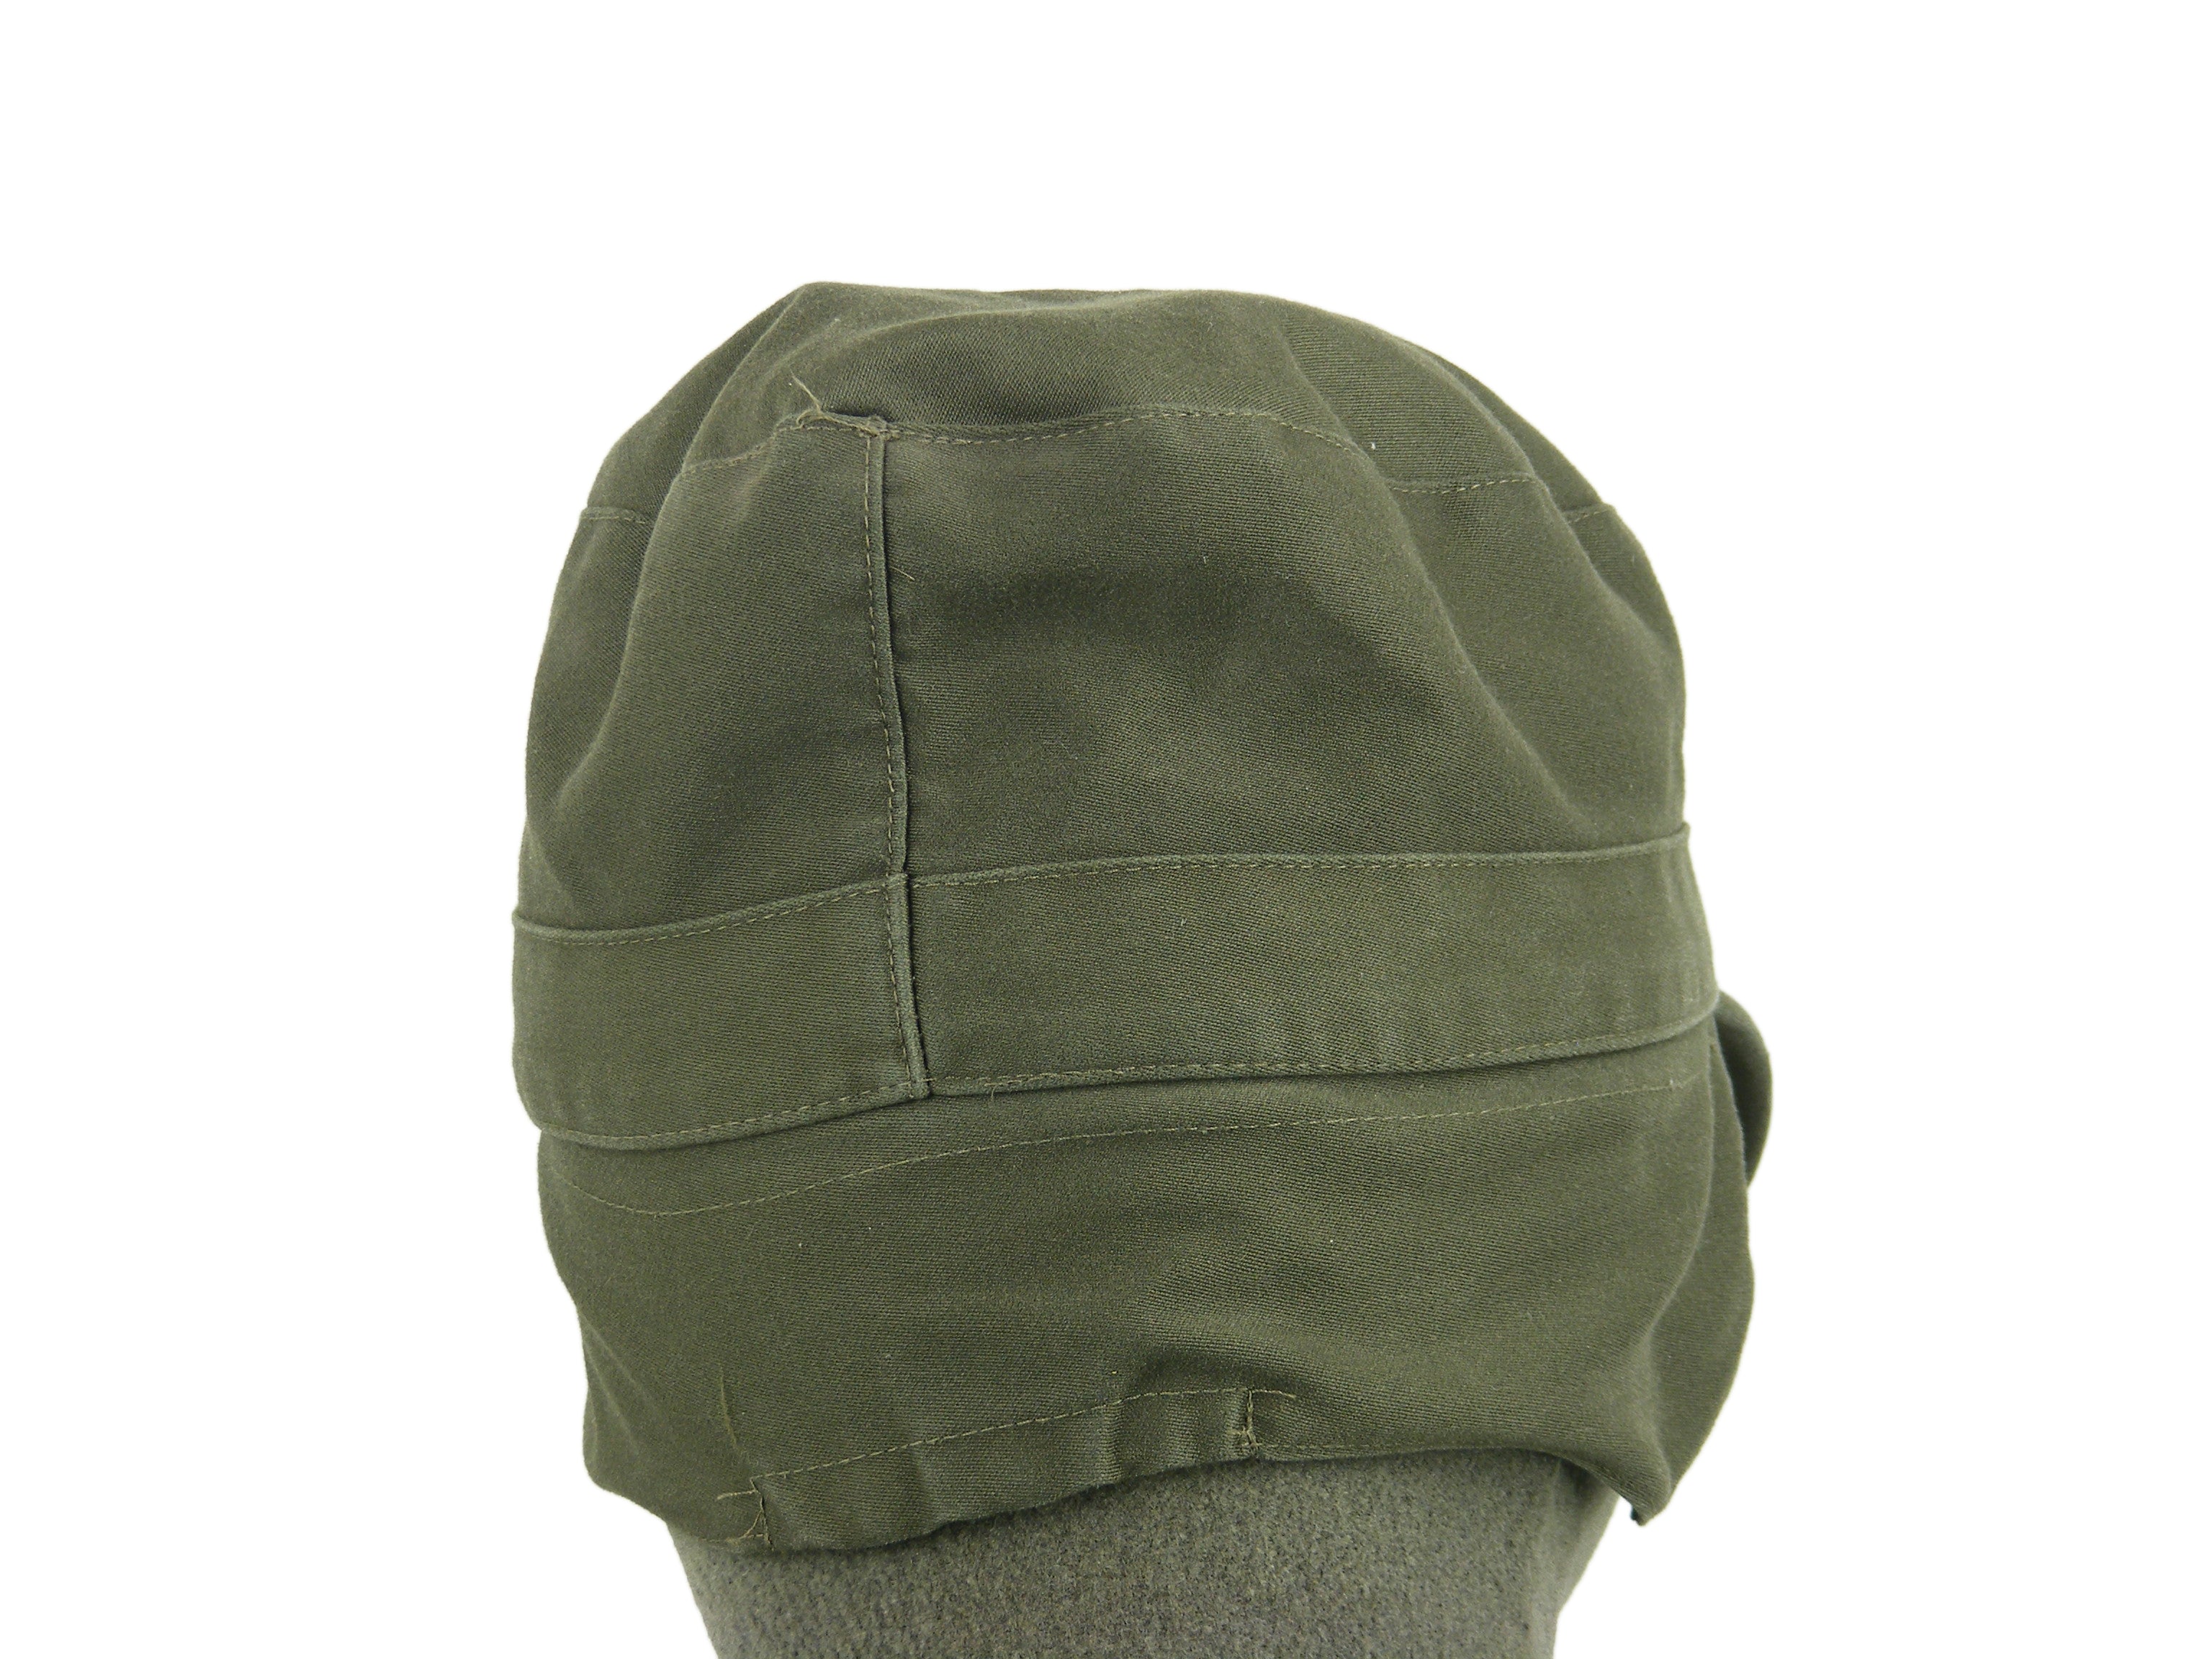 Austrian Olive Green Fatigue cap with neck shield - Forces Uniform and Kit